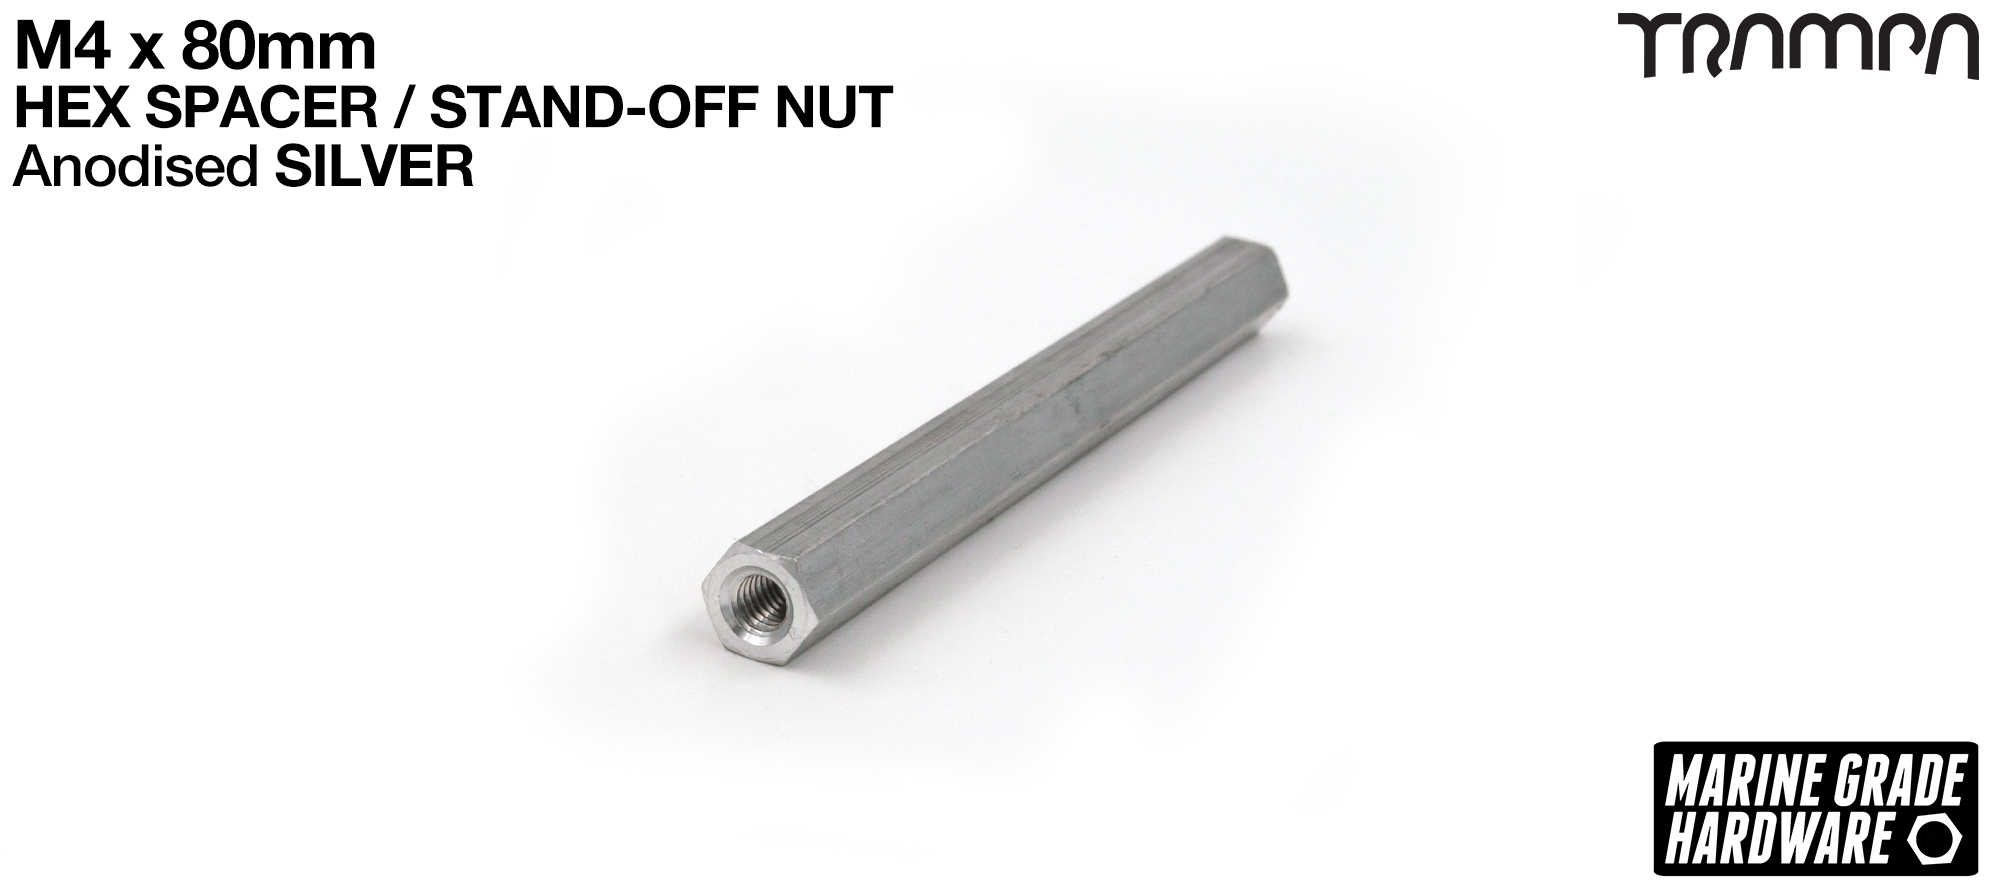 M4 x 80mm Aluminium Threaded Spacer Nut Used for assembling the BEAST Battery Boxes - NATURAL SILVER 